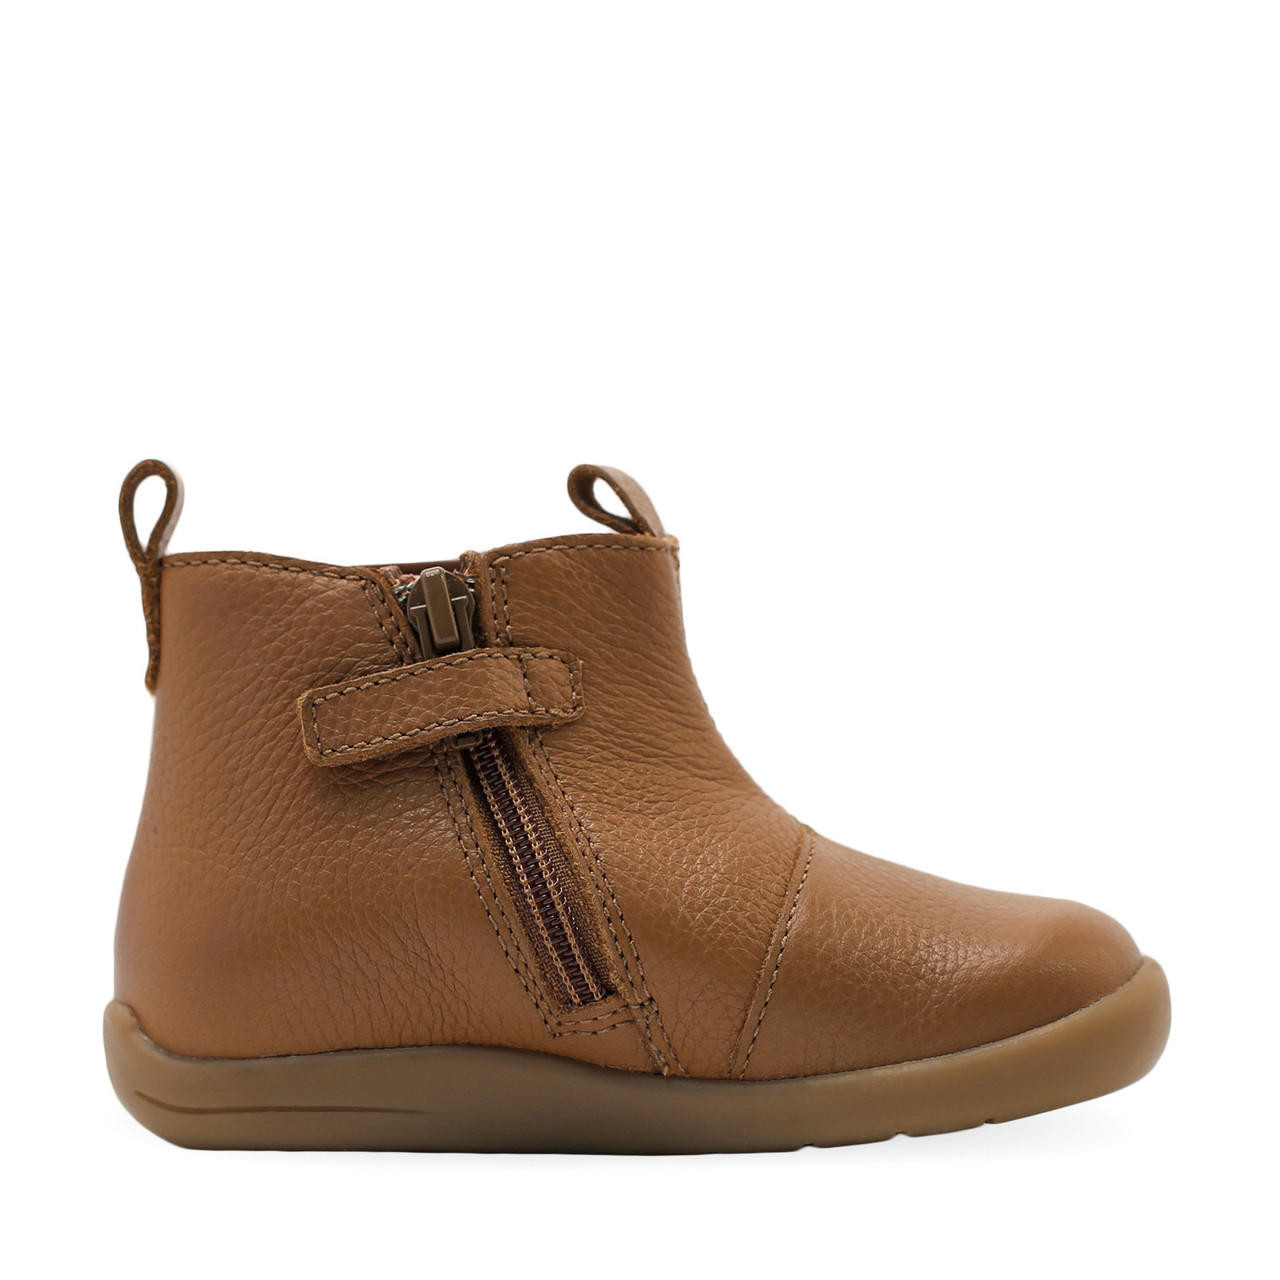 Avenue, Tan leather boys zip-up first boots